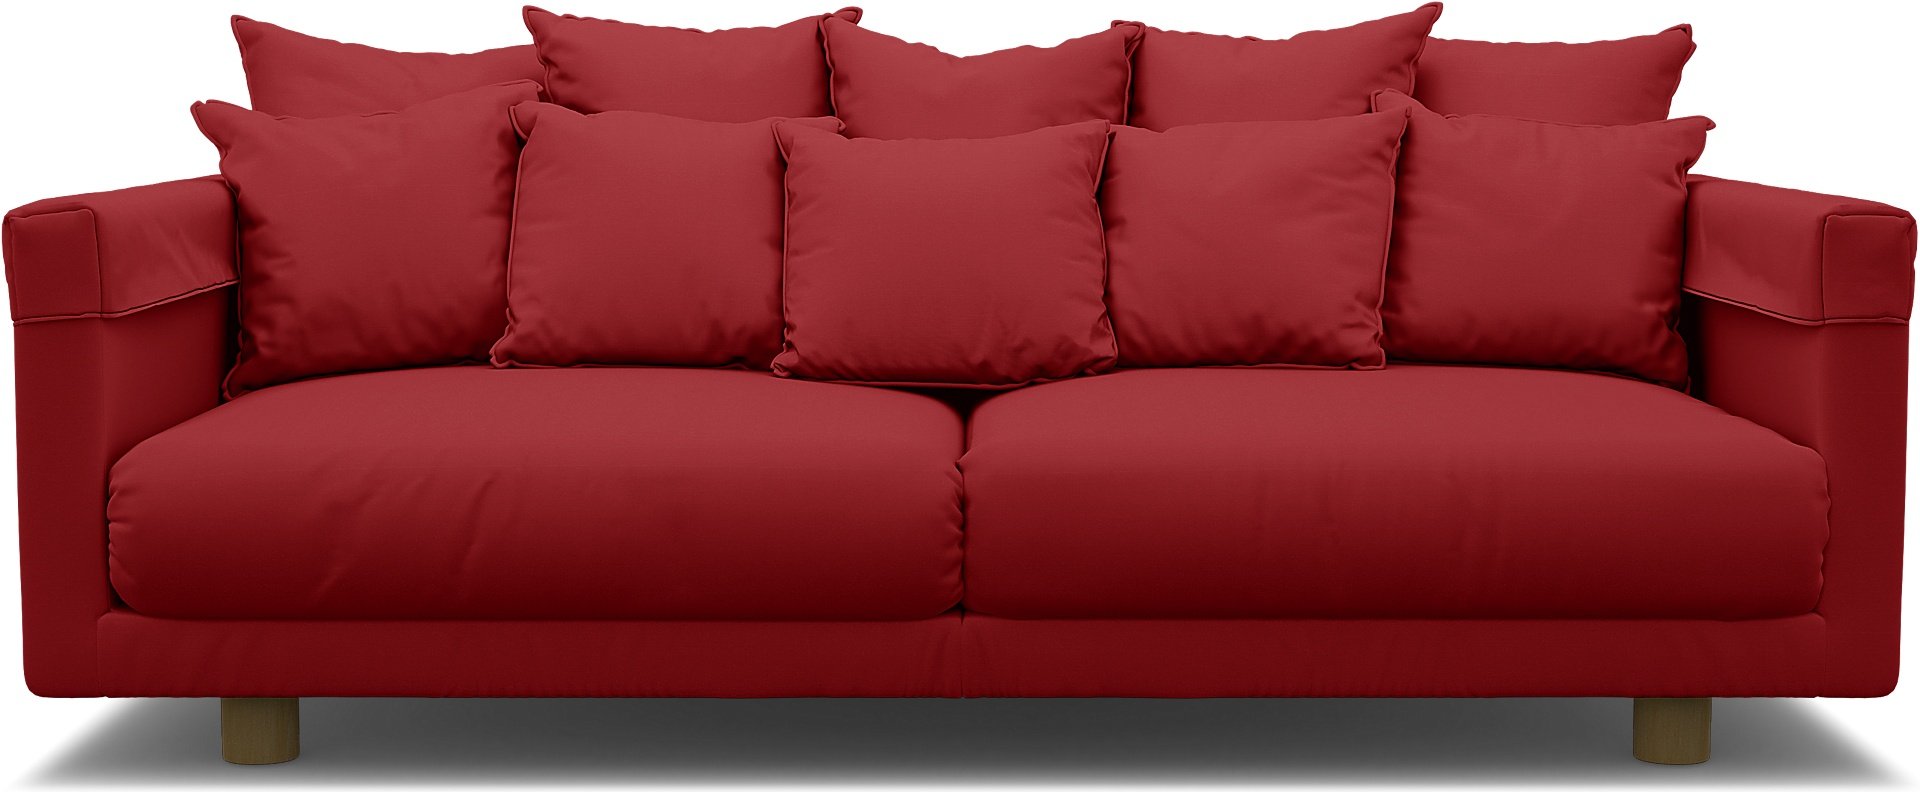 IKEA - Stockholm 2017 3 Seater Sofa Cover, Scarlet Red, Cotton - Bemz